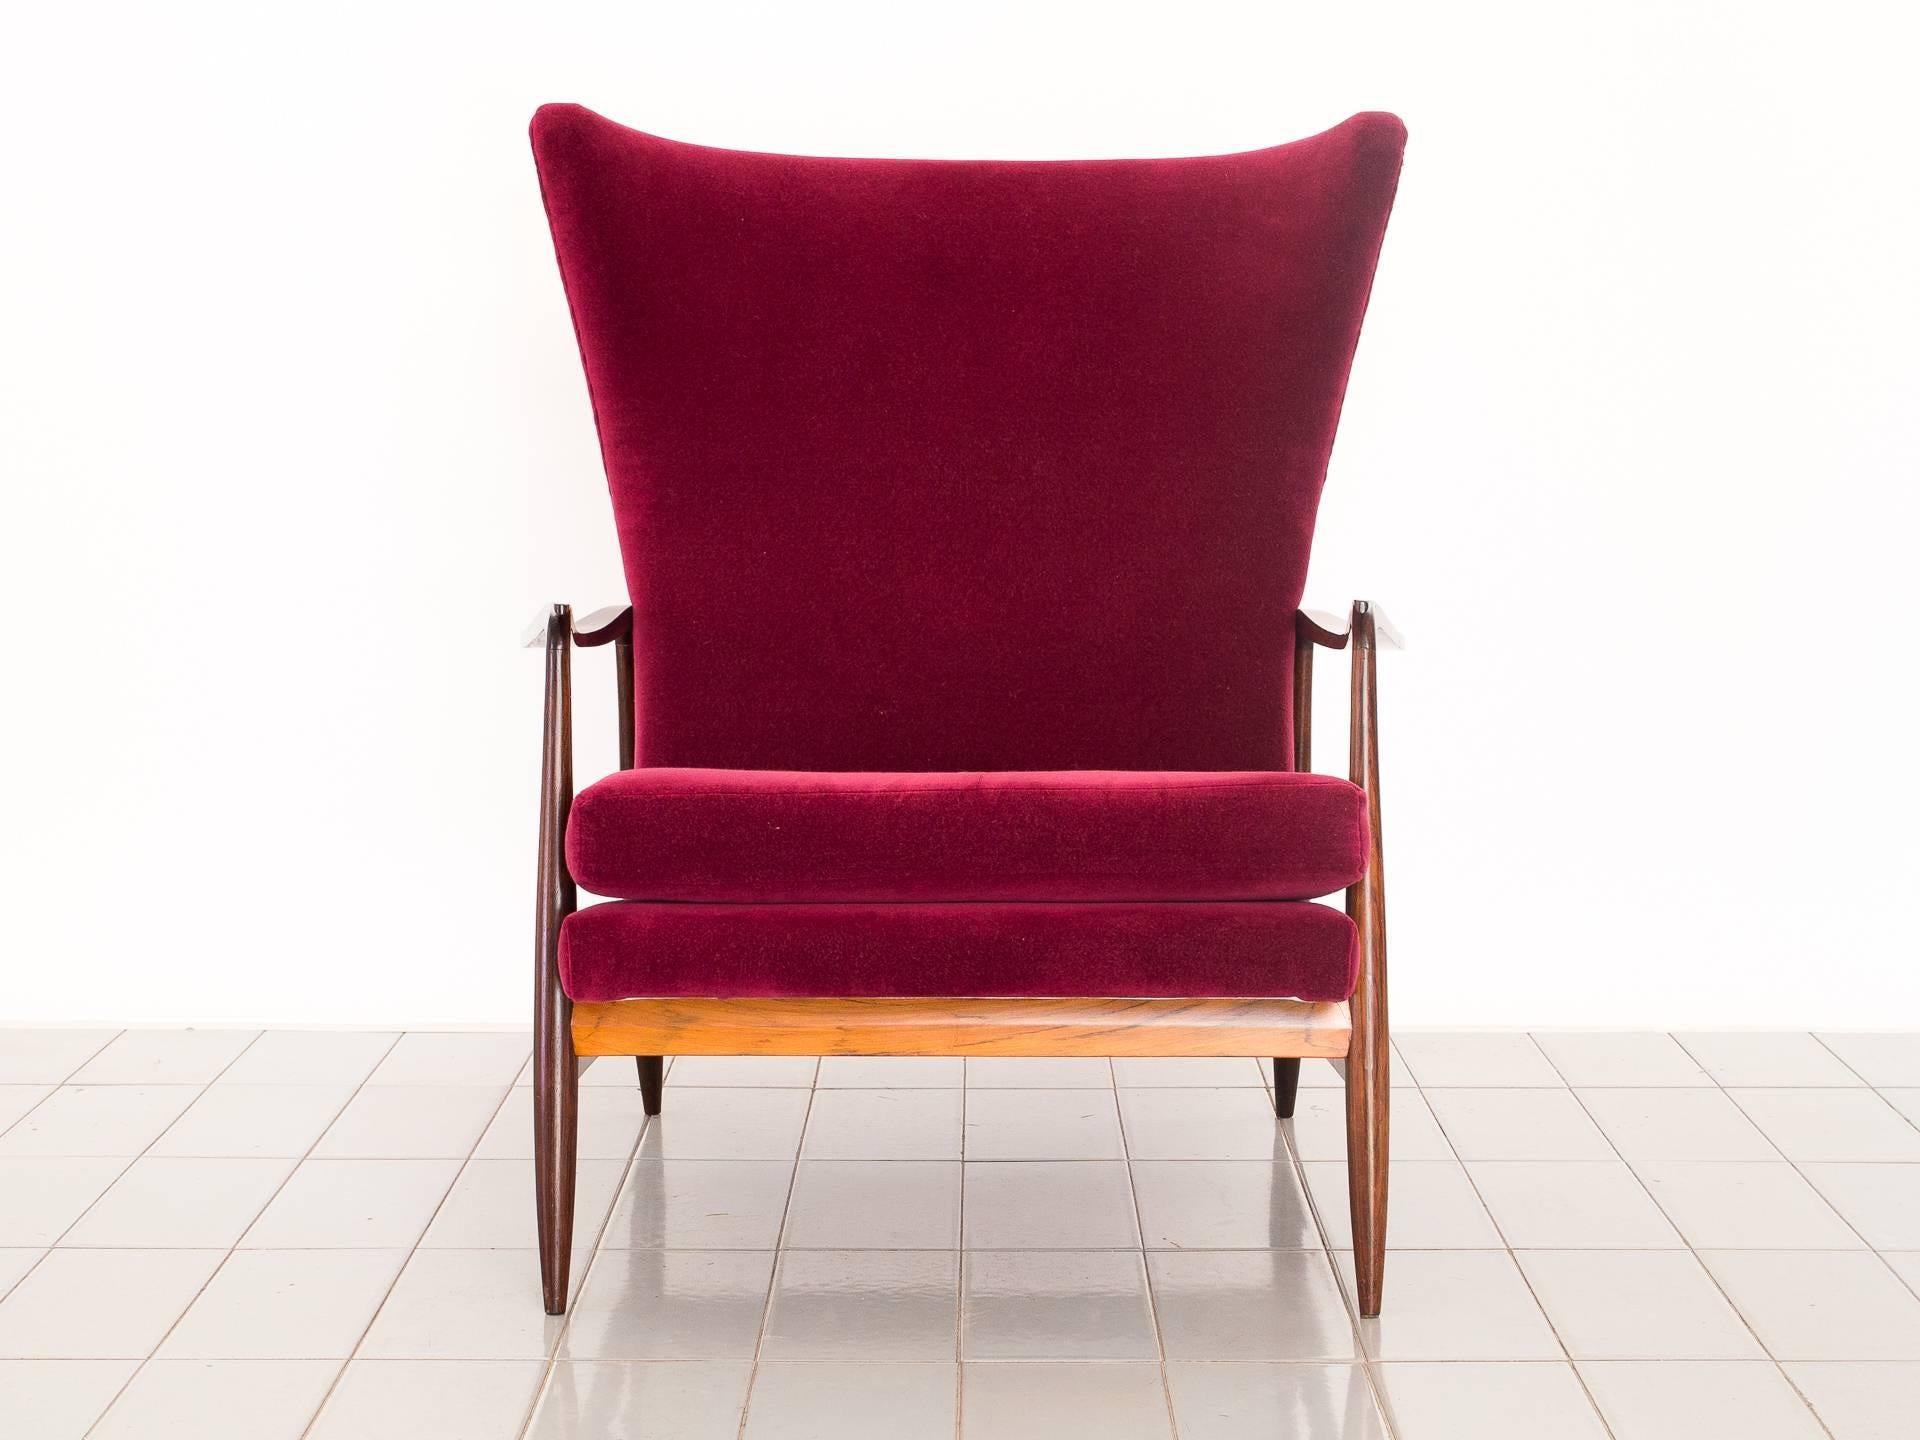 This beautiful Brazilian rosewood wingback lounger was produced by Móveis Cimo, one of the biggest furniture companies in mid century Brazil. Upholstered in 100% cotton velvet, and new refinishing of the wood. The chair has a factory production